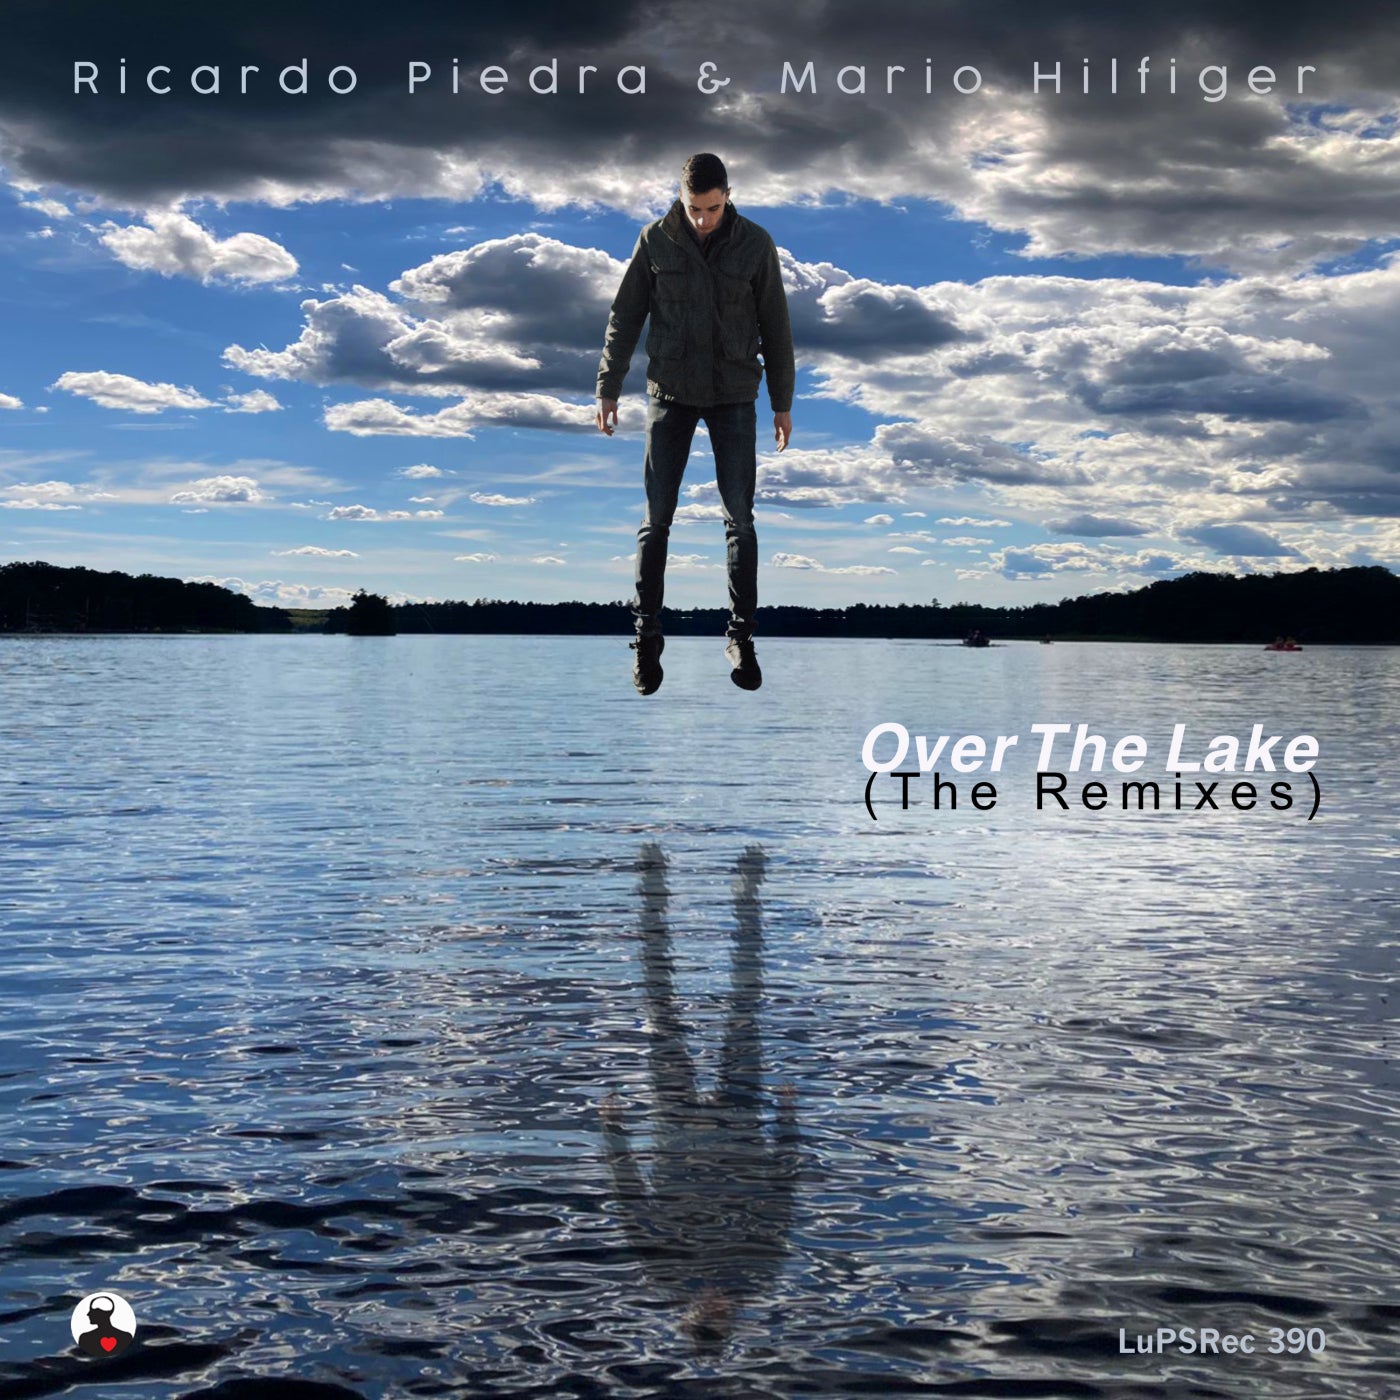 Over the Lake (The Remixes)